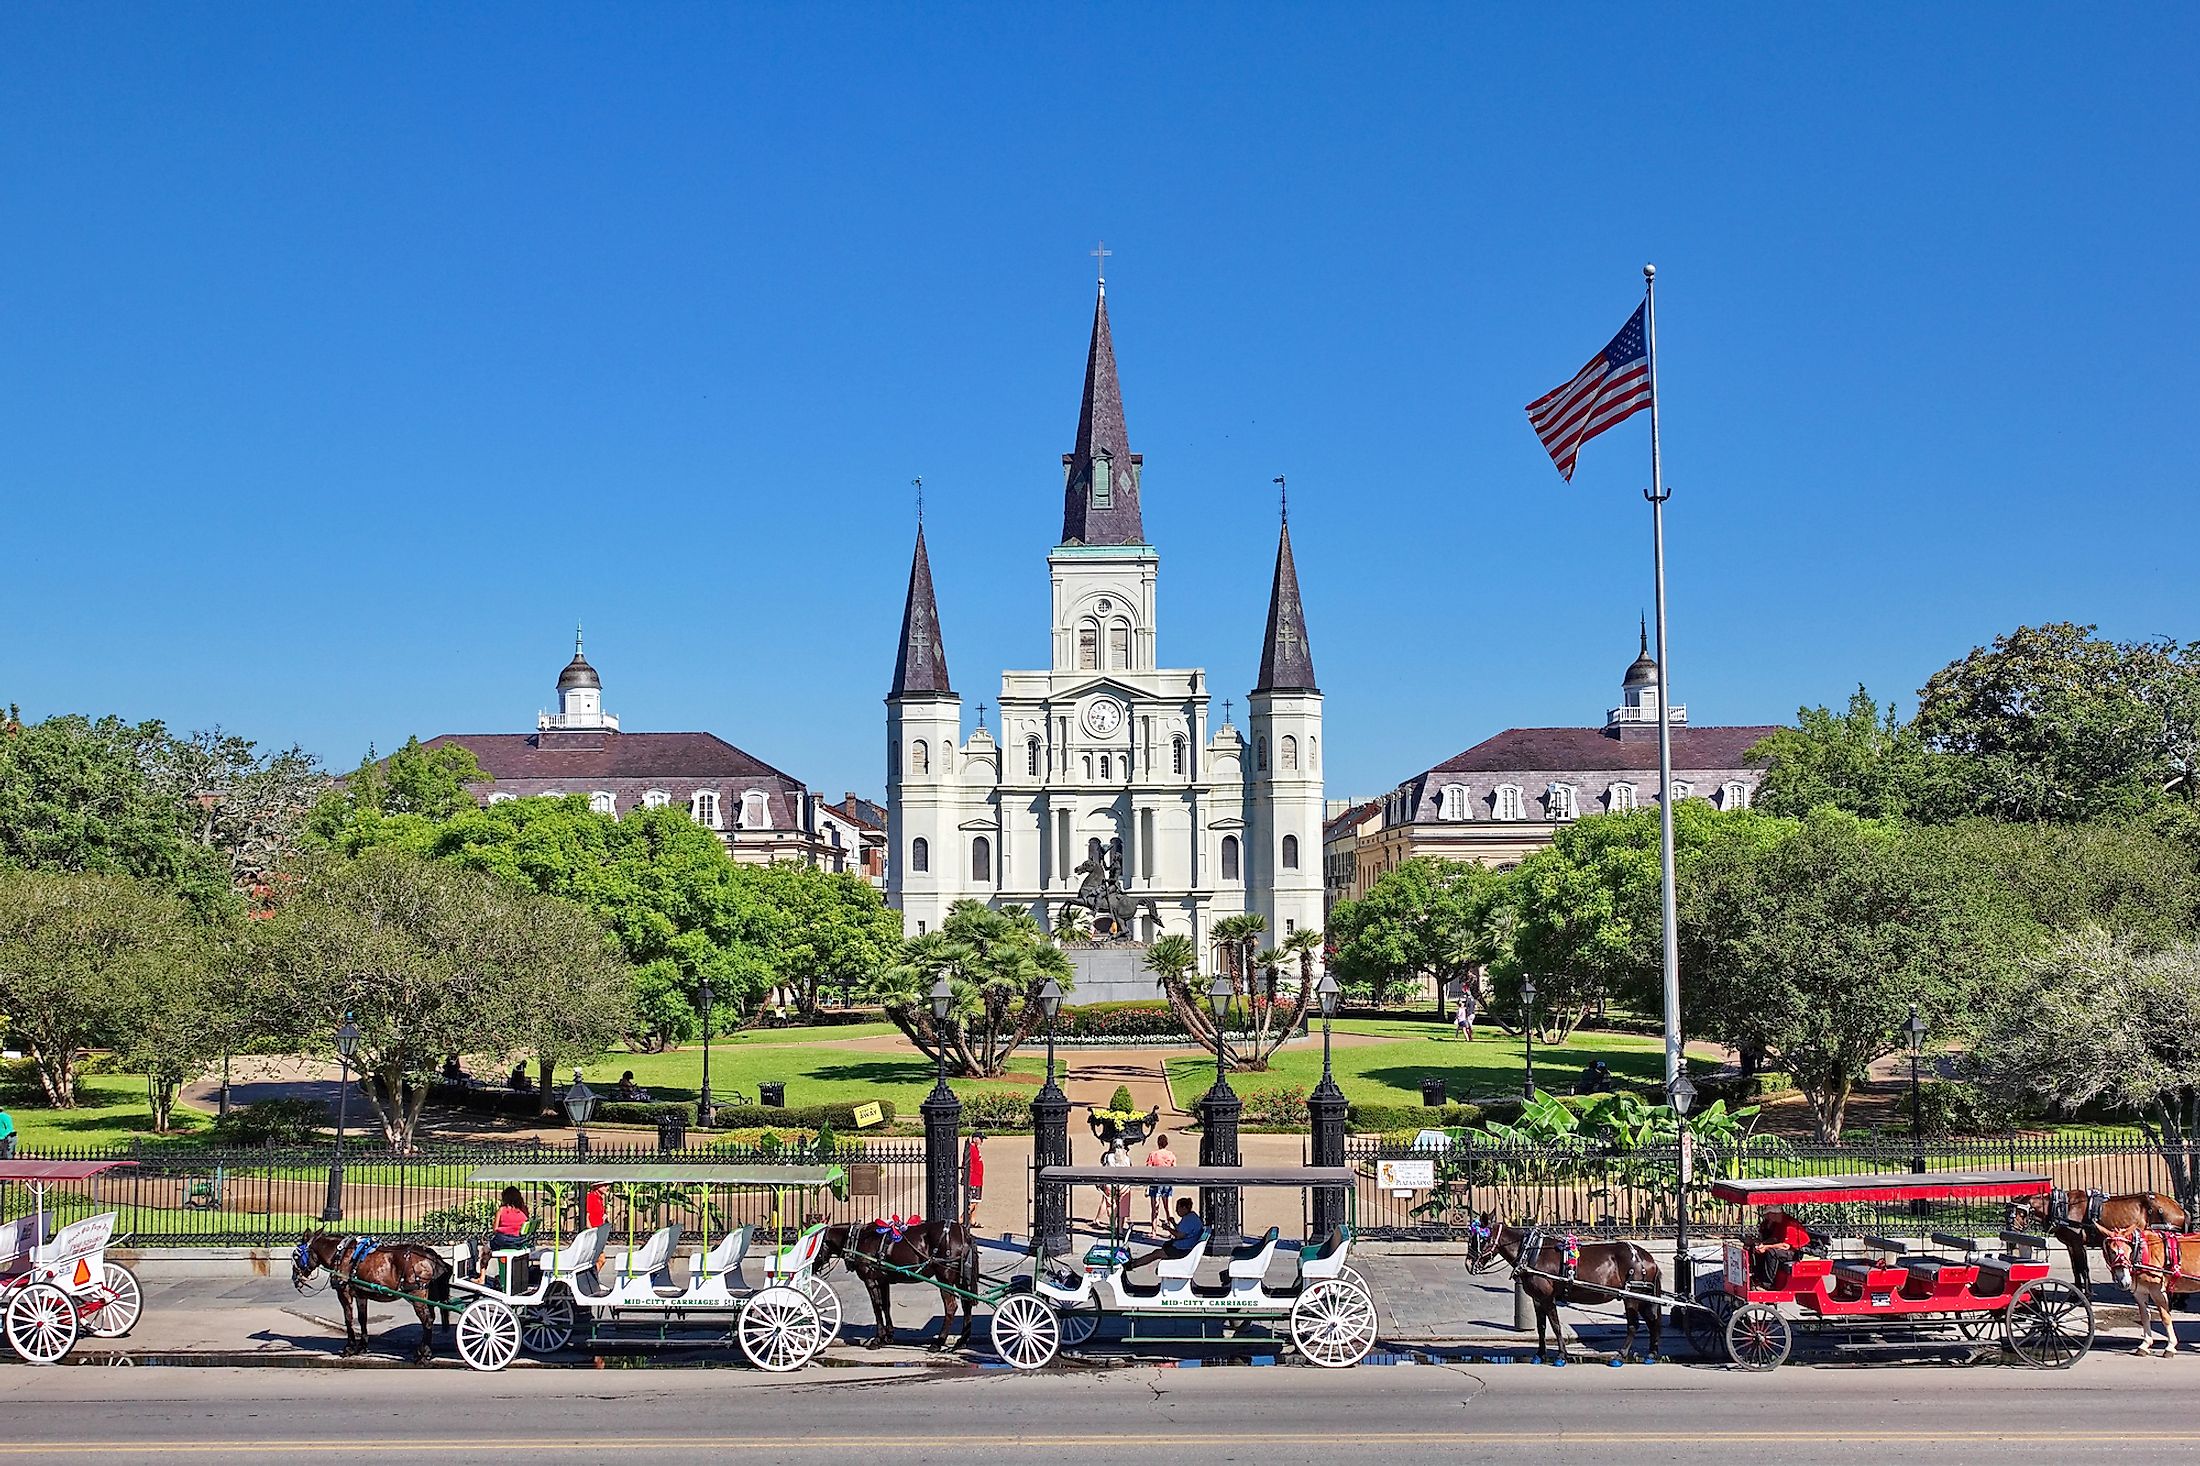 NEW ORLEANS, LOUISIANA. Editorial credit: Simply Photos / Shutterstock.com